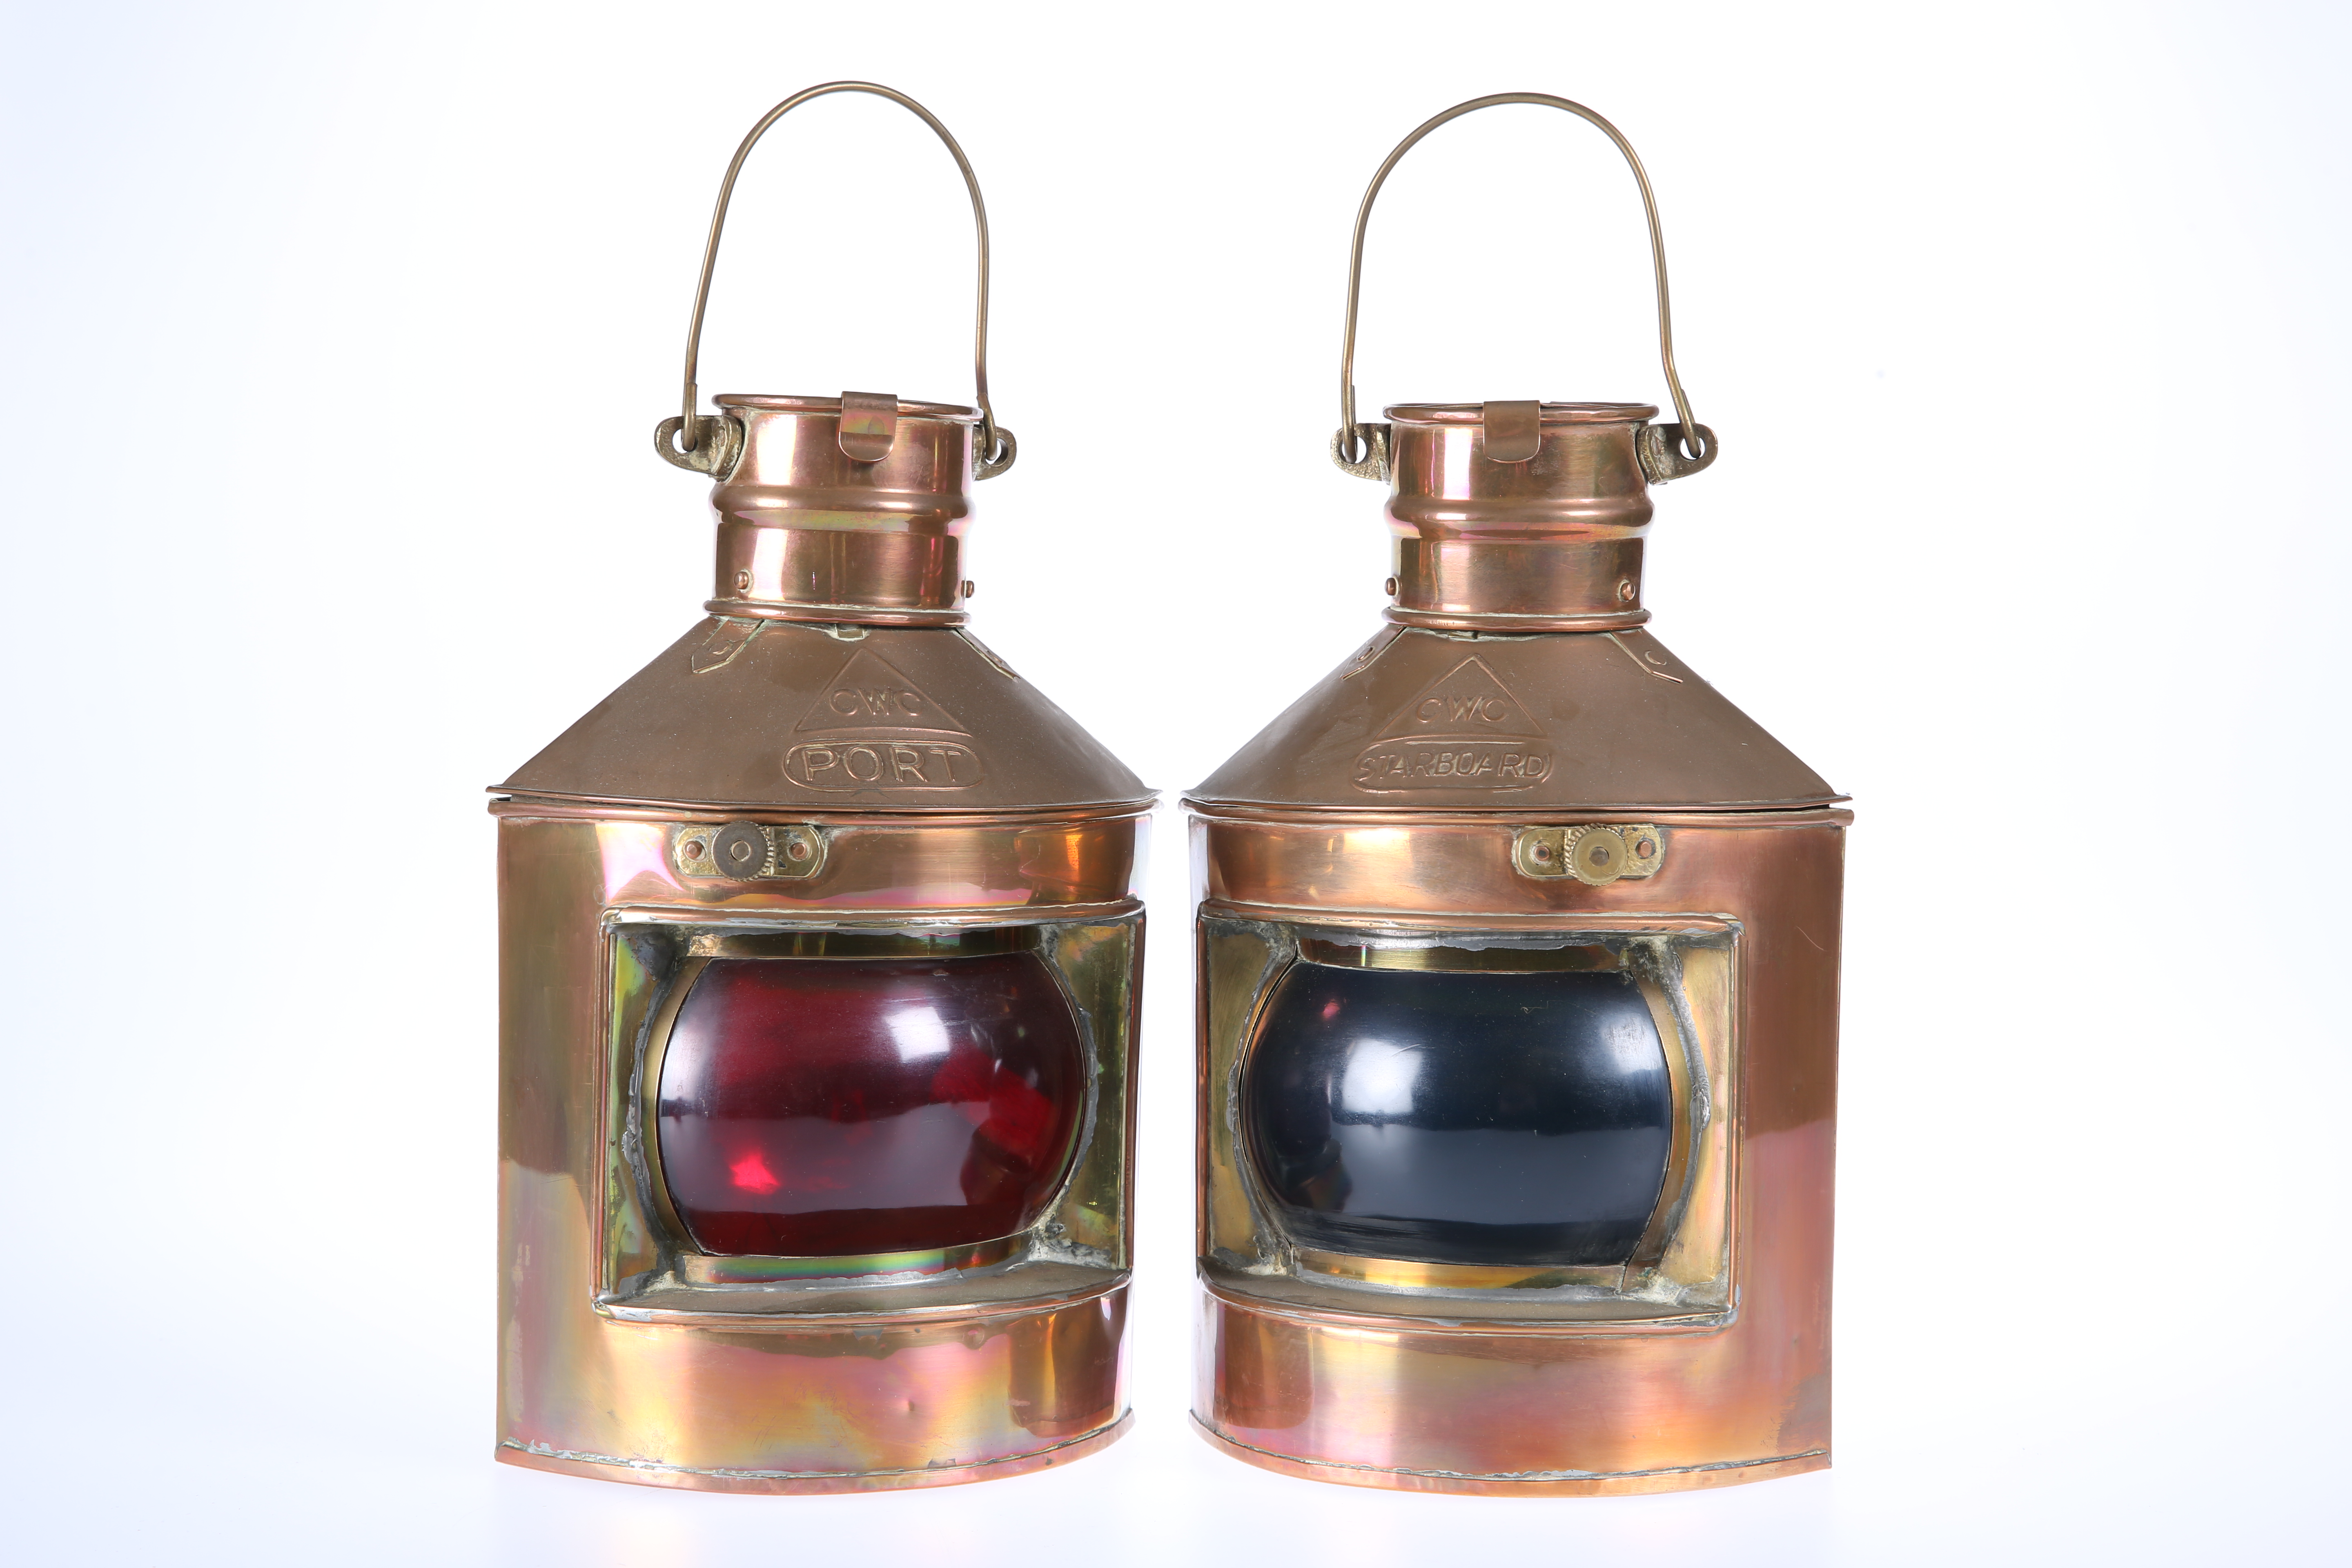 A PAIR OF CWC COPPER SHIPS LAMPS